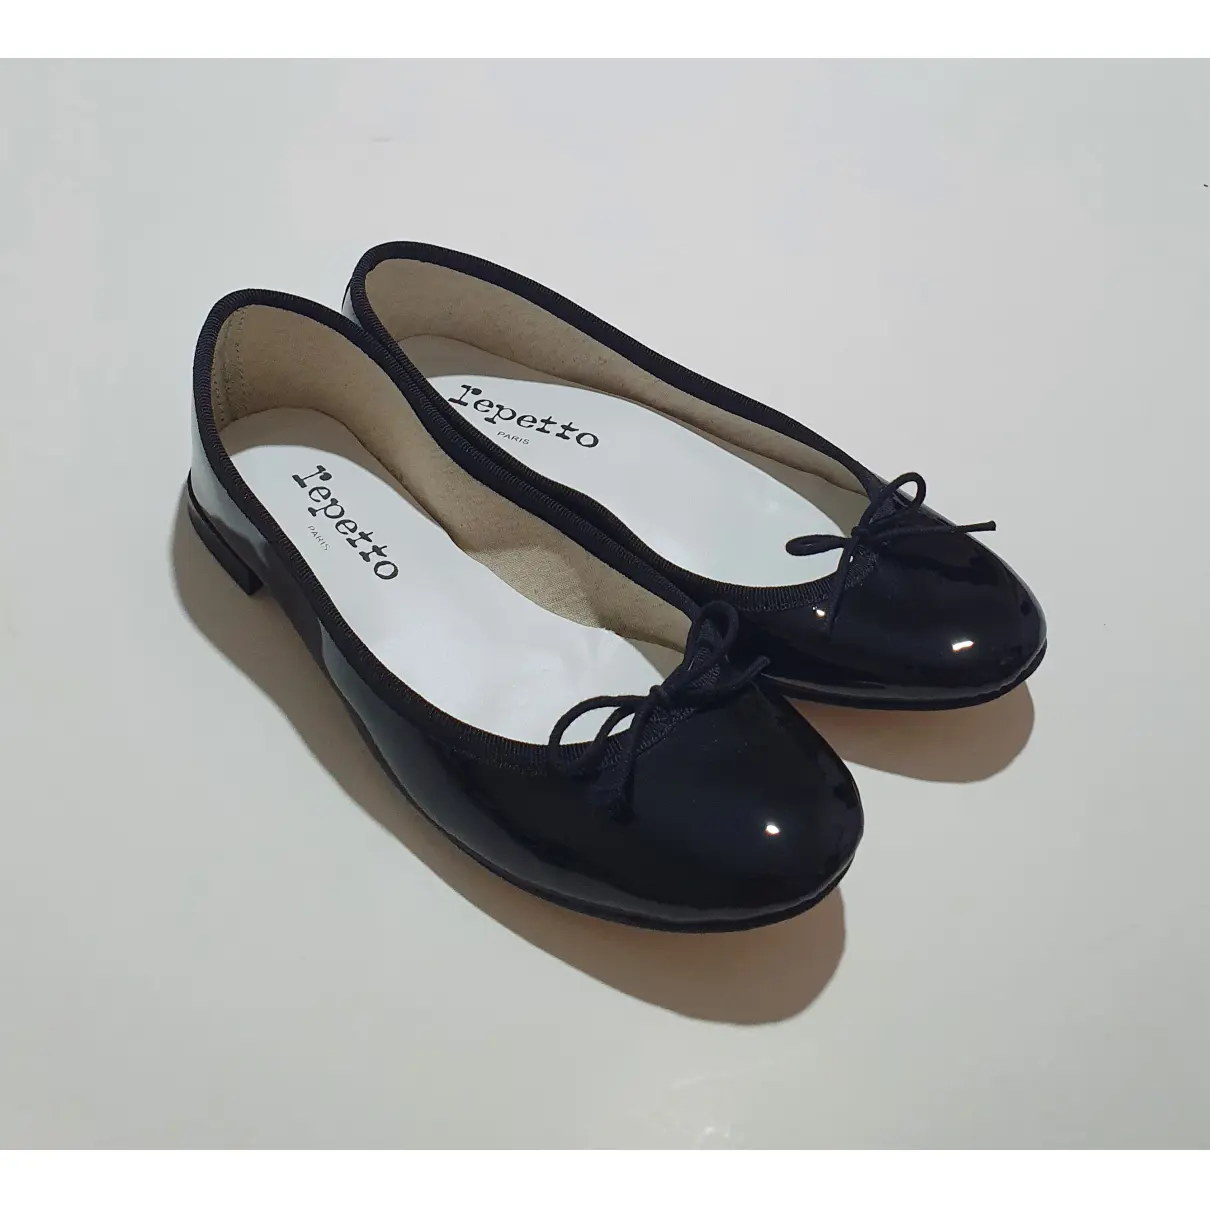 Buy Repetto Patent leather ballet flats online